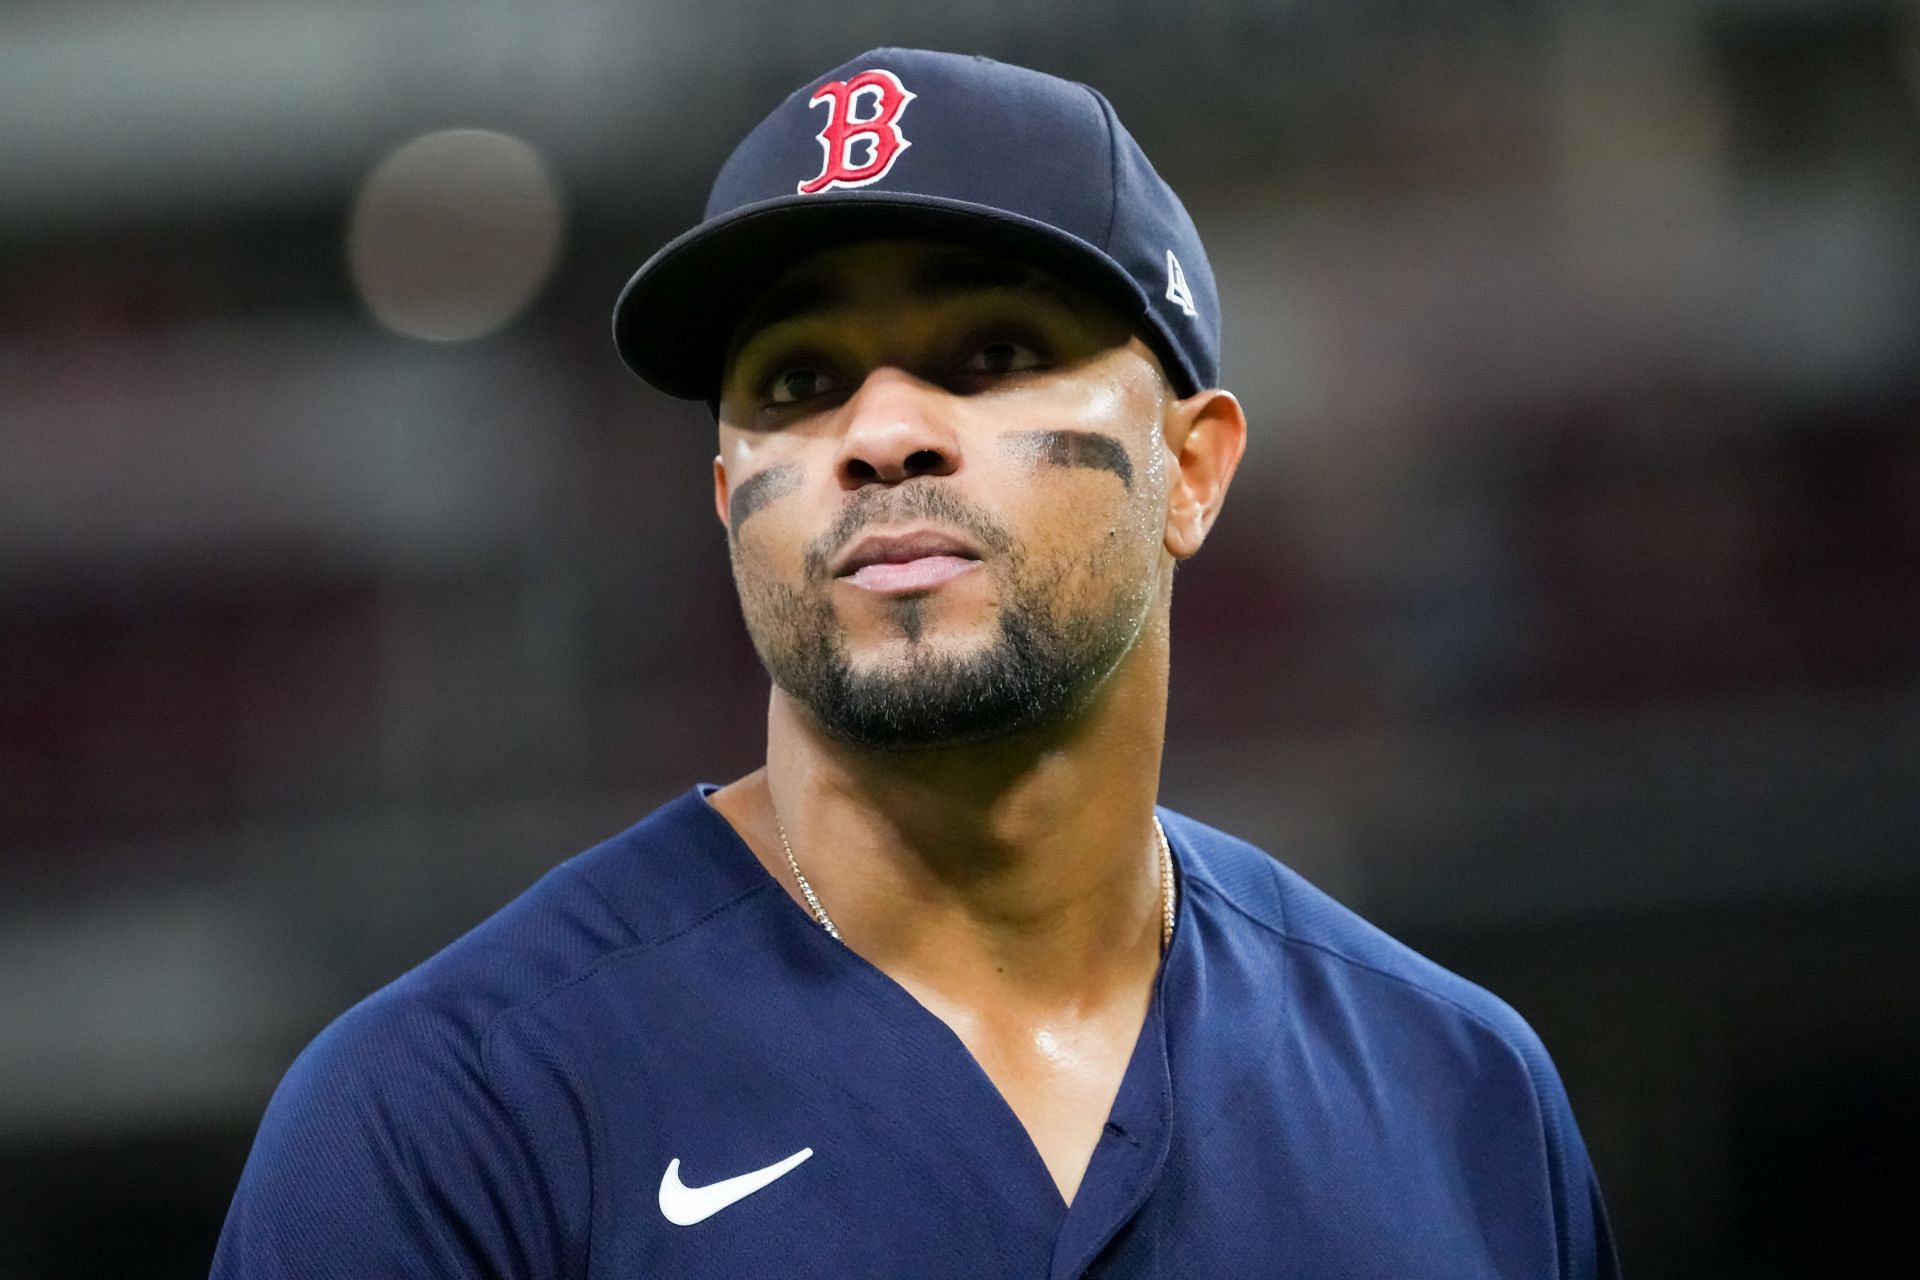 MLB Network analyst weighs in on Xander Bogaerts situation